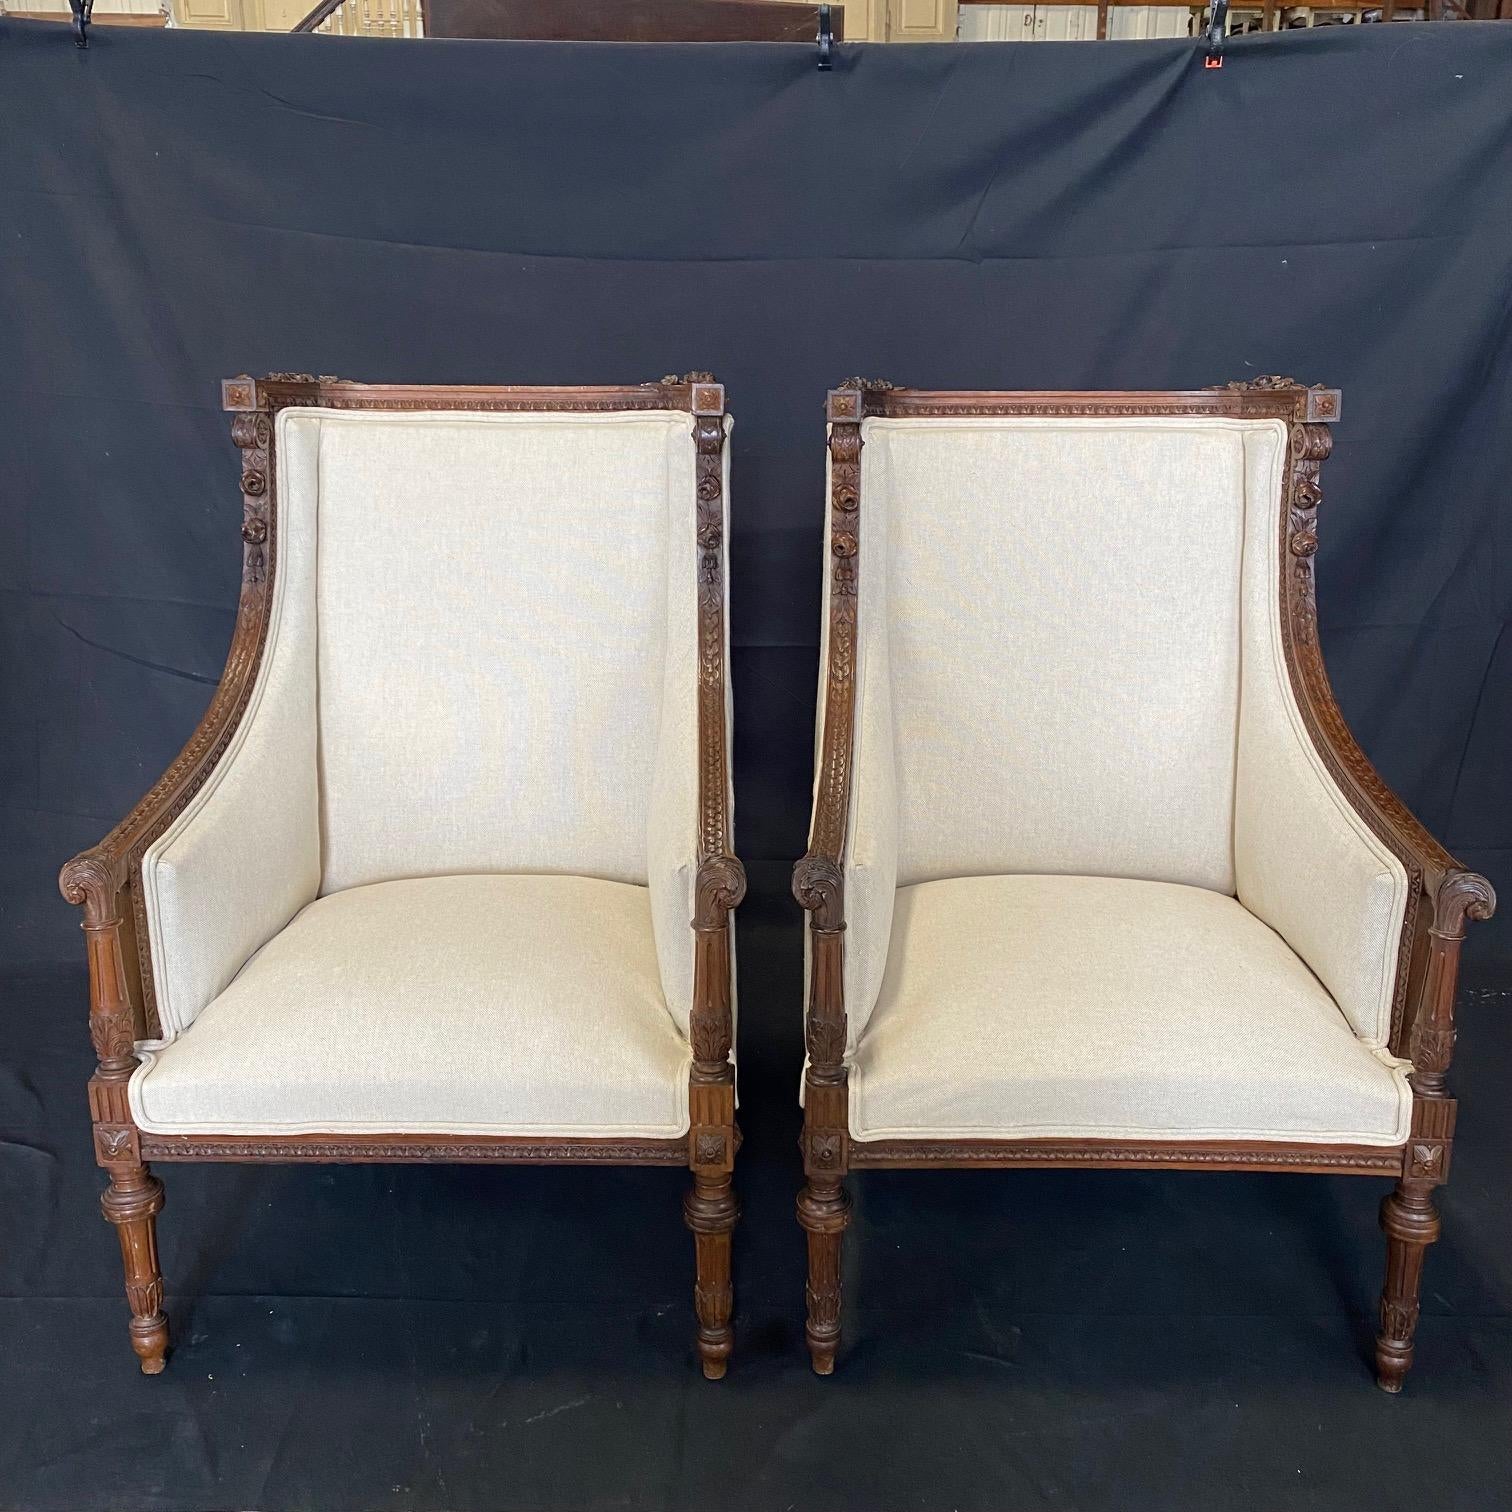 Acanthus scrolls, florets and reeded legs are just a few of the exquisitely carved details in these museum quality carved pair of walnut chairs bought outside of Paris. Newly reupholstered in a lovely neutral high quality British linen cotton blend,